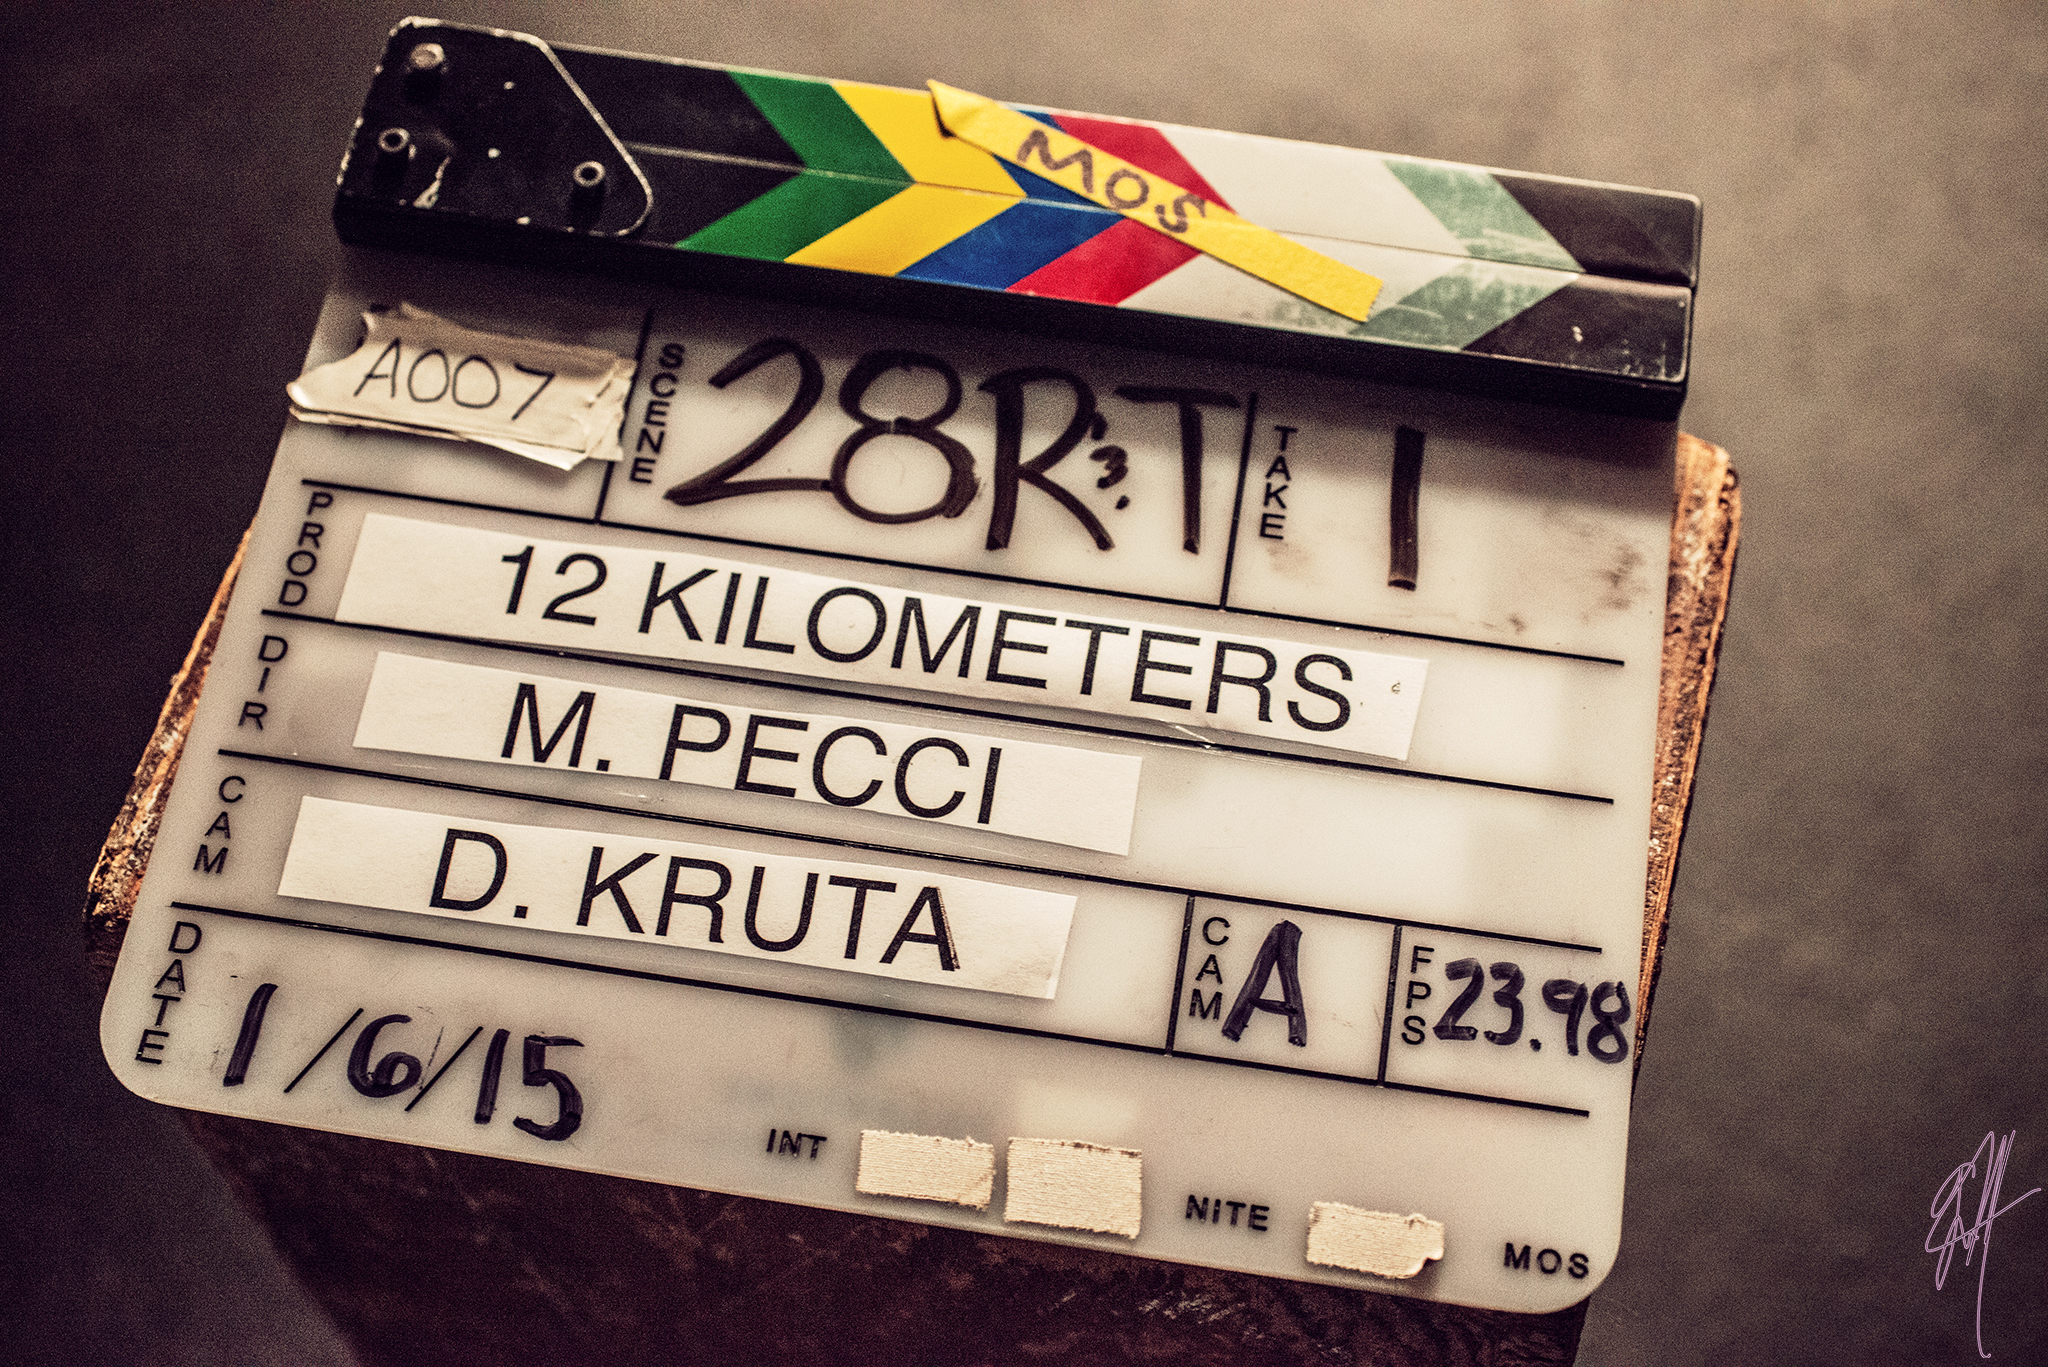 12 Kilometers directed by Mike Pecci